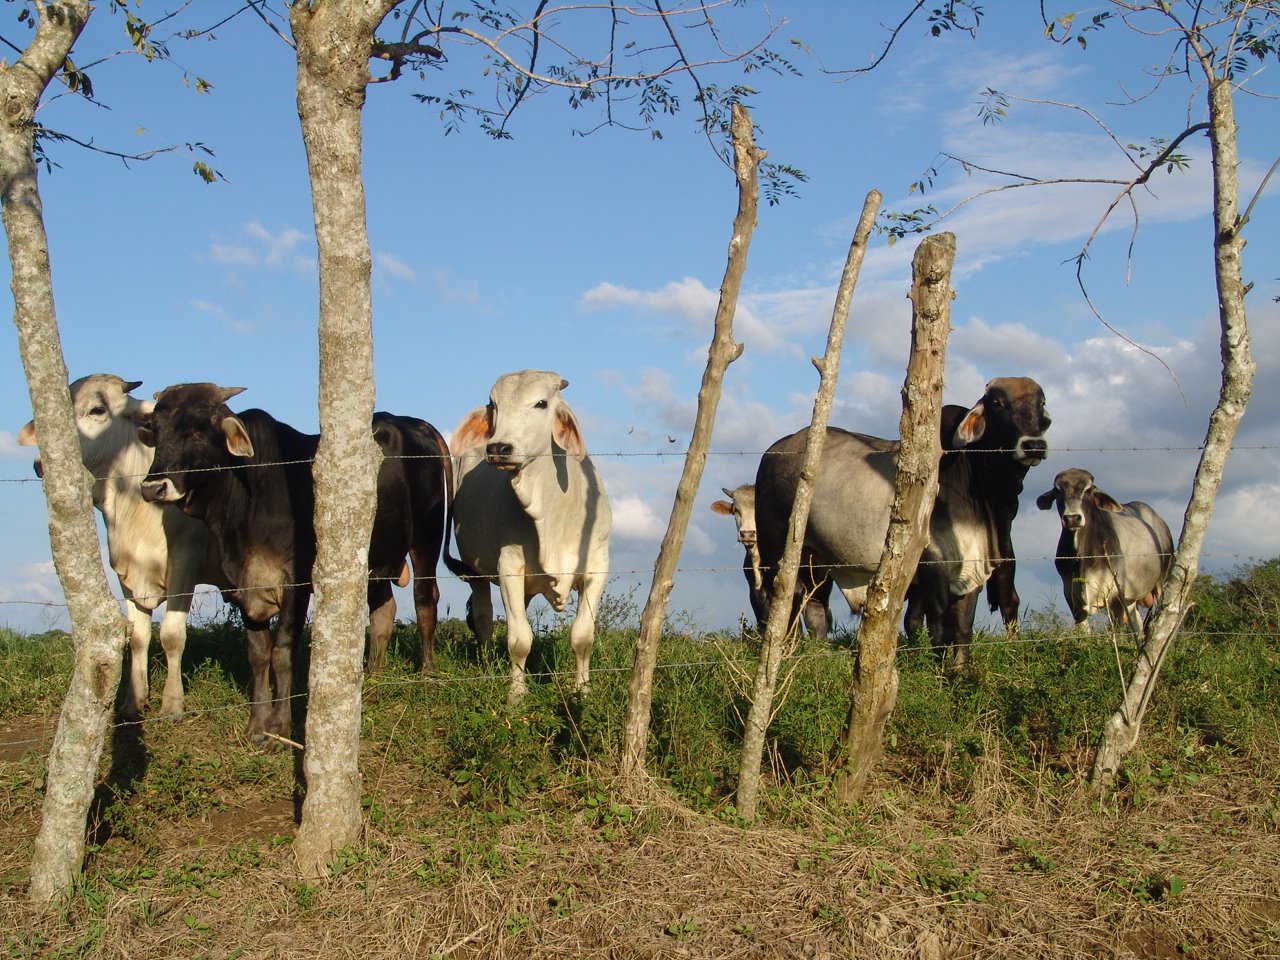 cows are standing beside the fence, near the trees